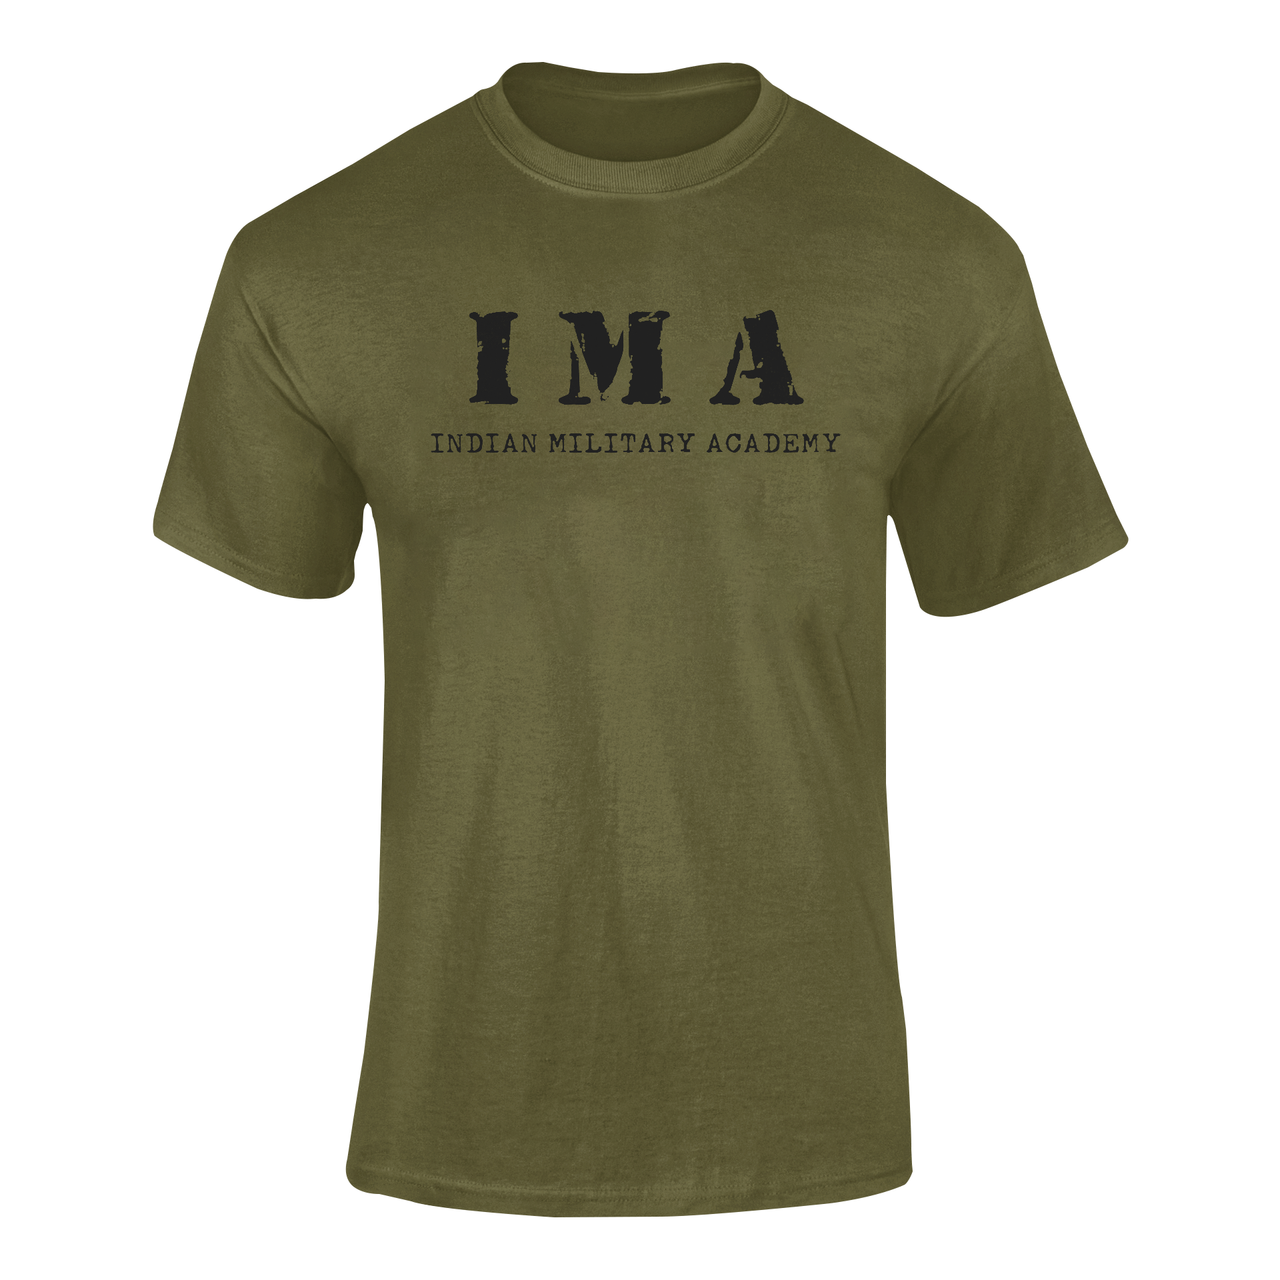 Army T-shirt - IMA - Indian Military Academy (Men)